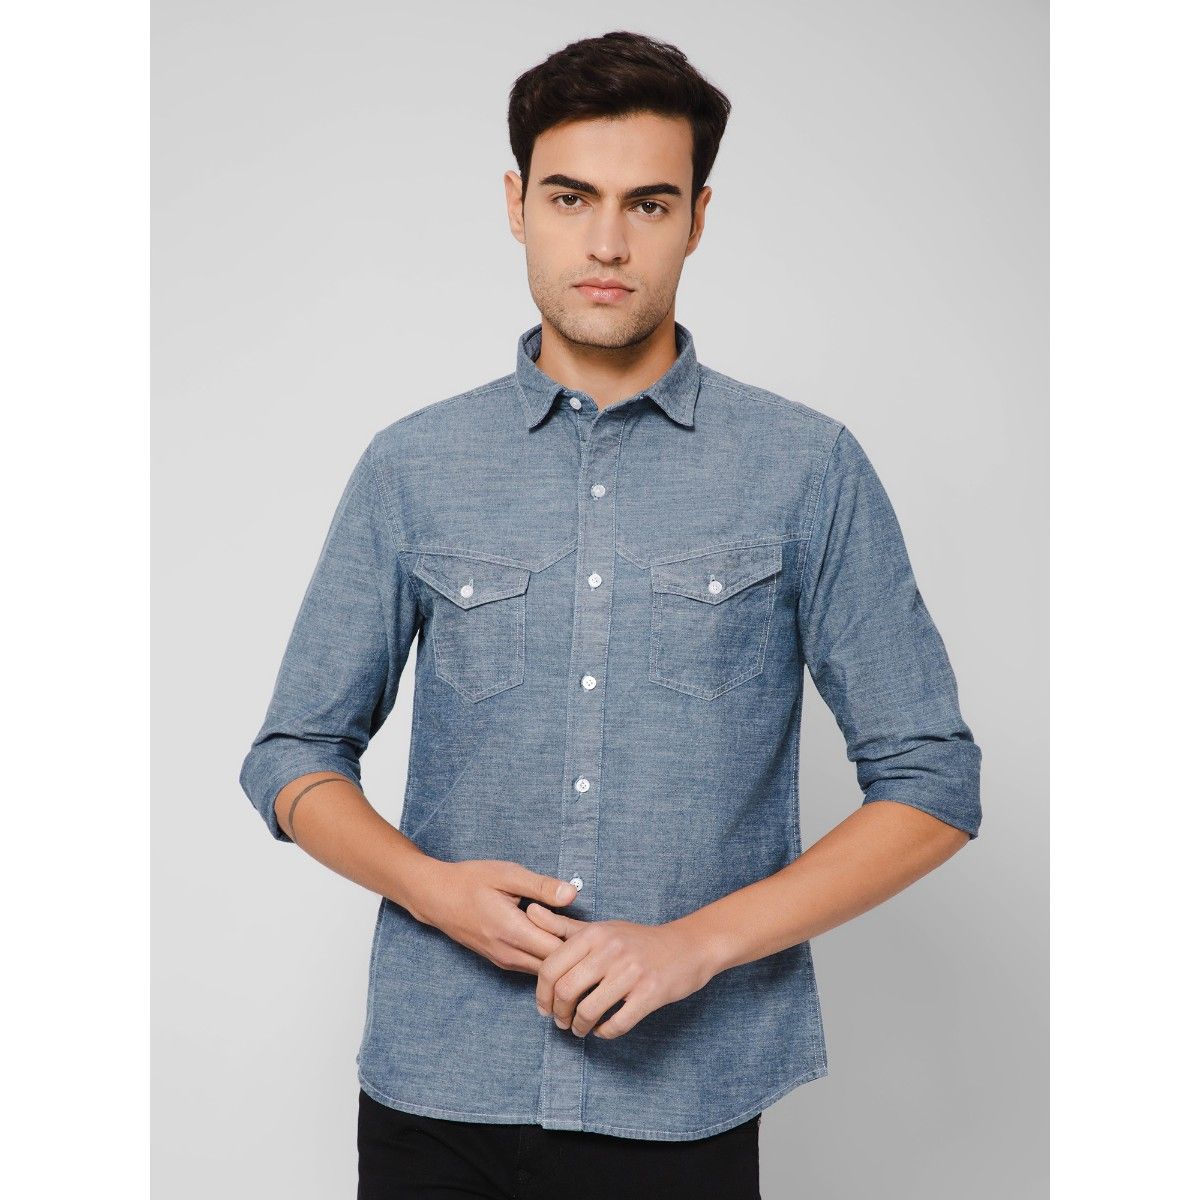 CANTABIL Men Printed Casual Light Blue Shirt - Buy CANTABIL Men Printed  Casual Light Blue Shirt Online at Best Prices in India | Flipkart.com